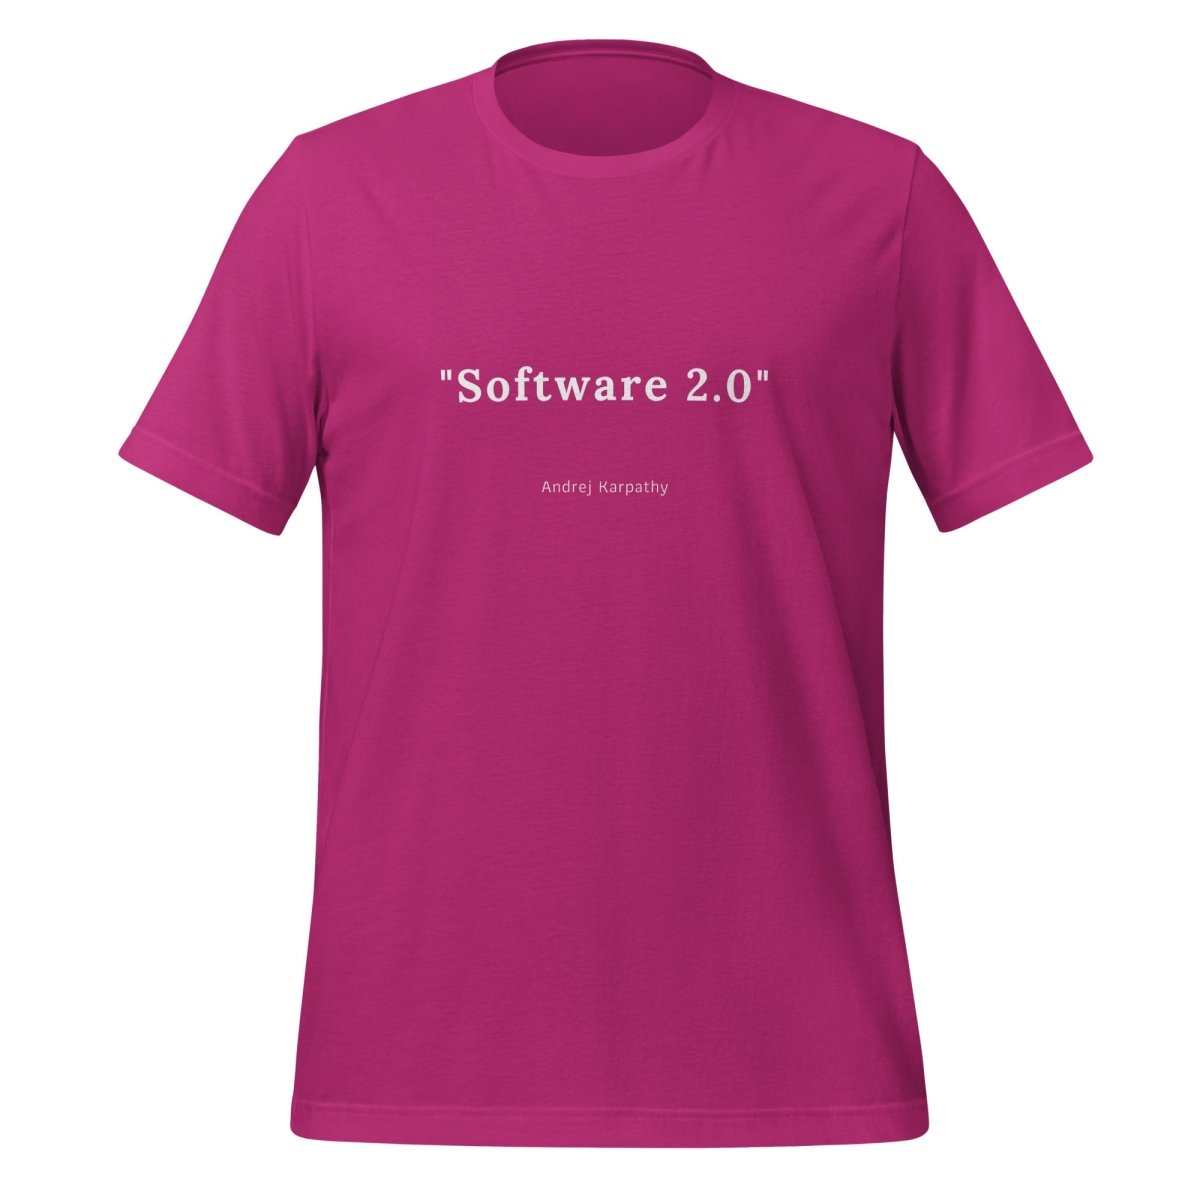 Software 2.0 [Andrej Karpathy] T - Shirt (unisex) - Berry - AI Store